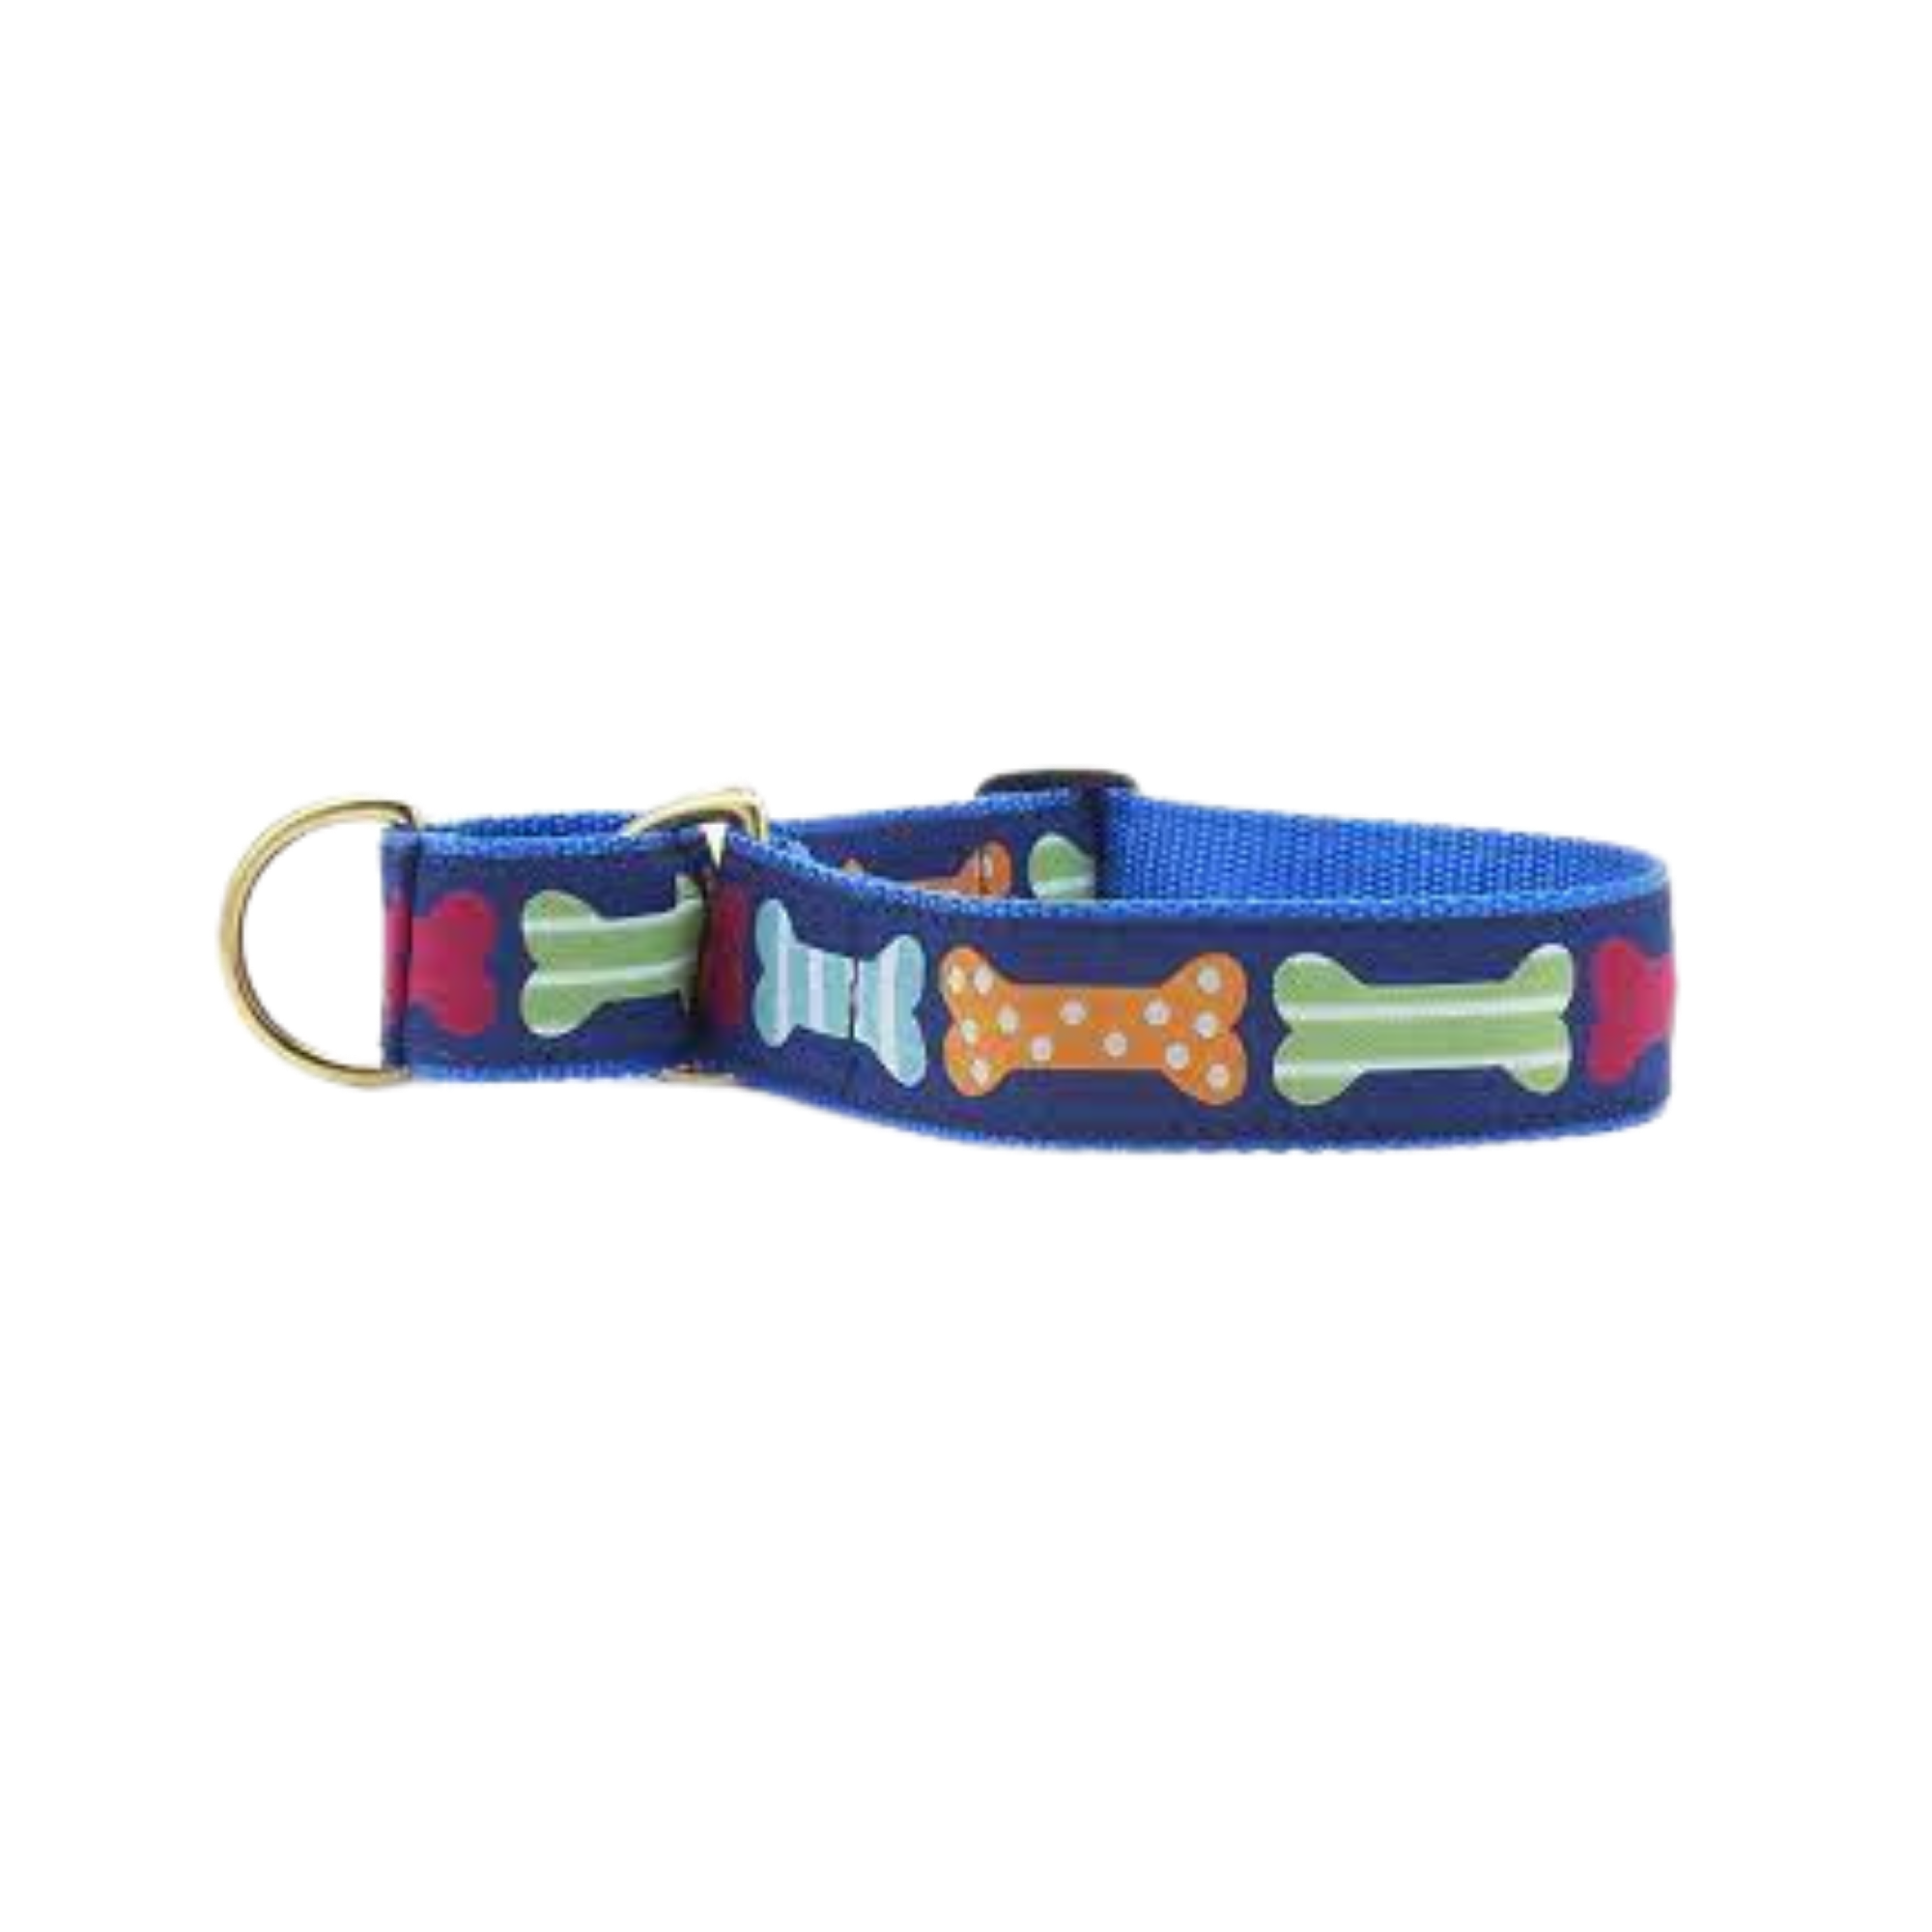 Up Country Big Bones Dog Collar - Mutts & Co.